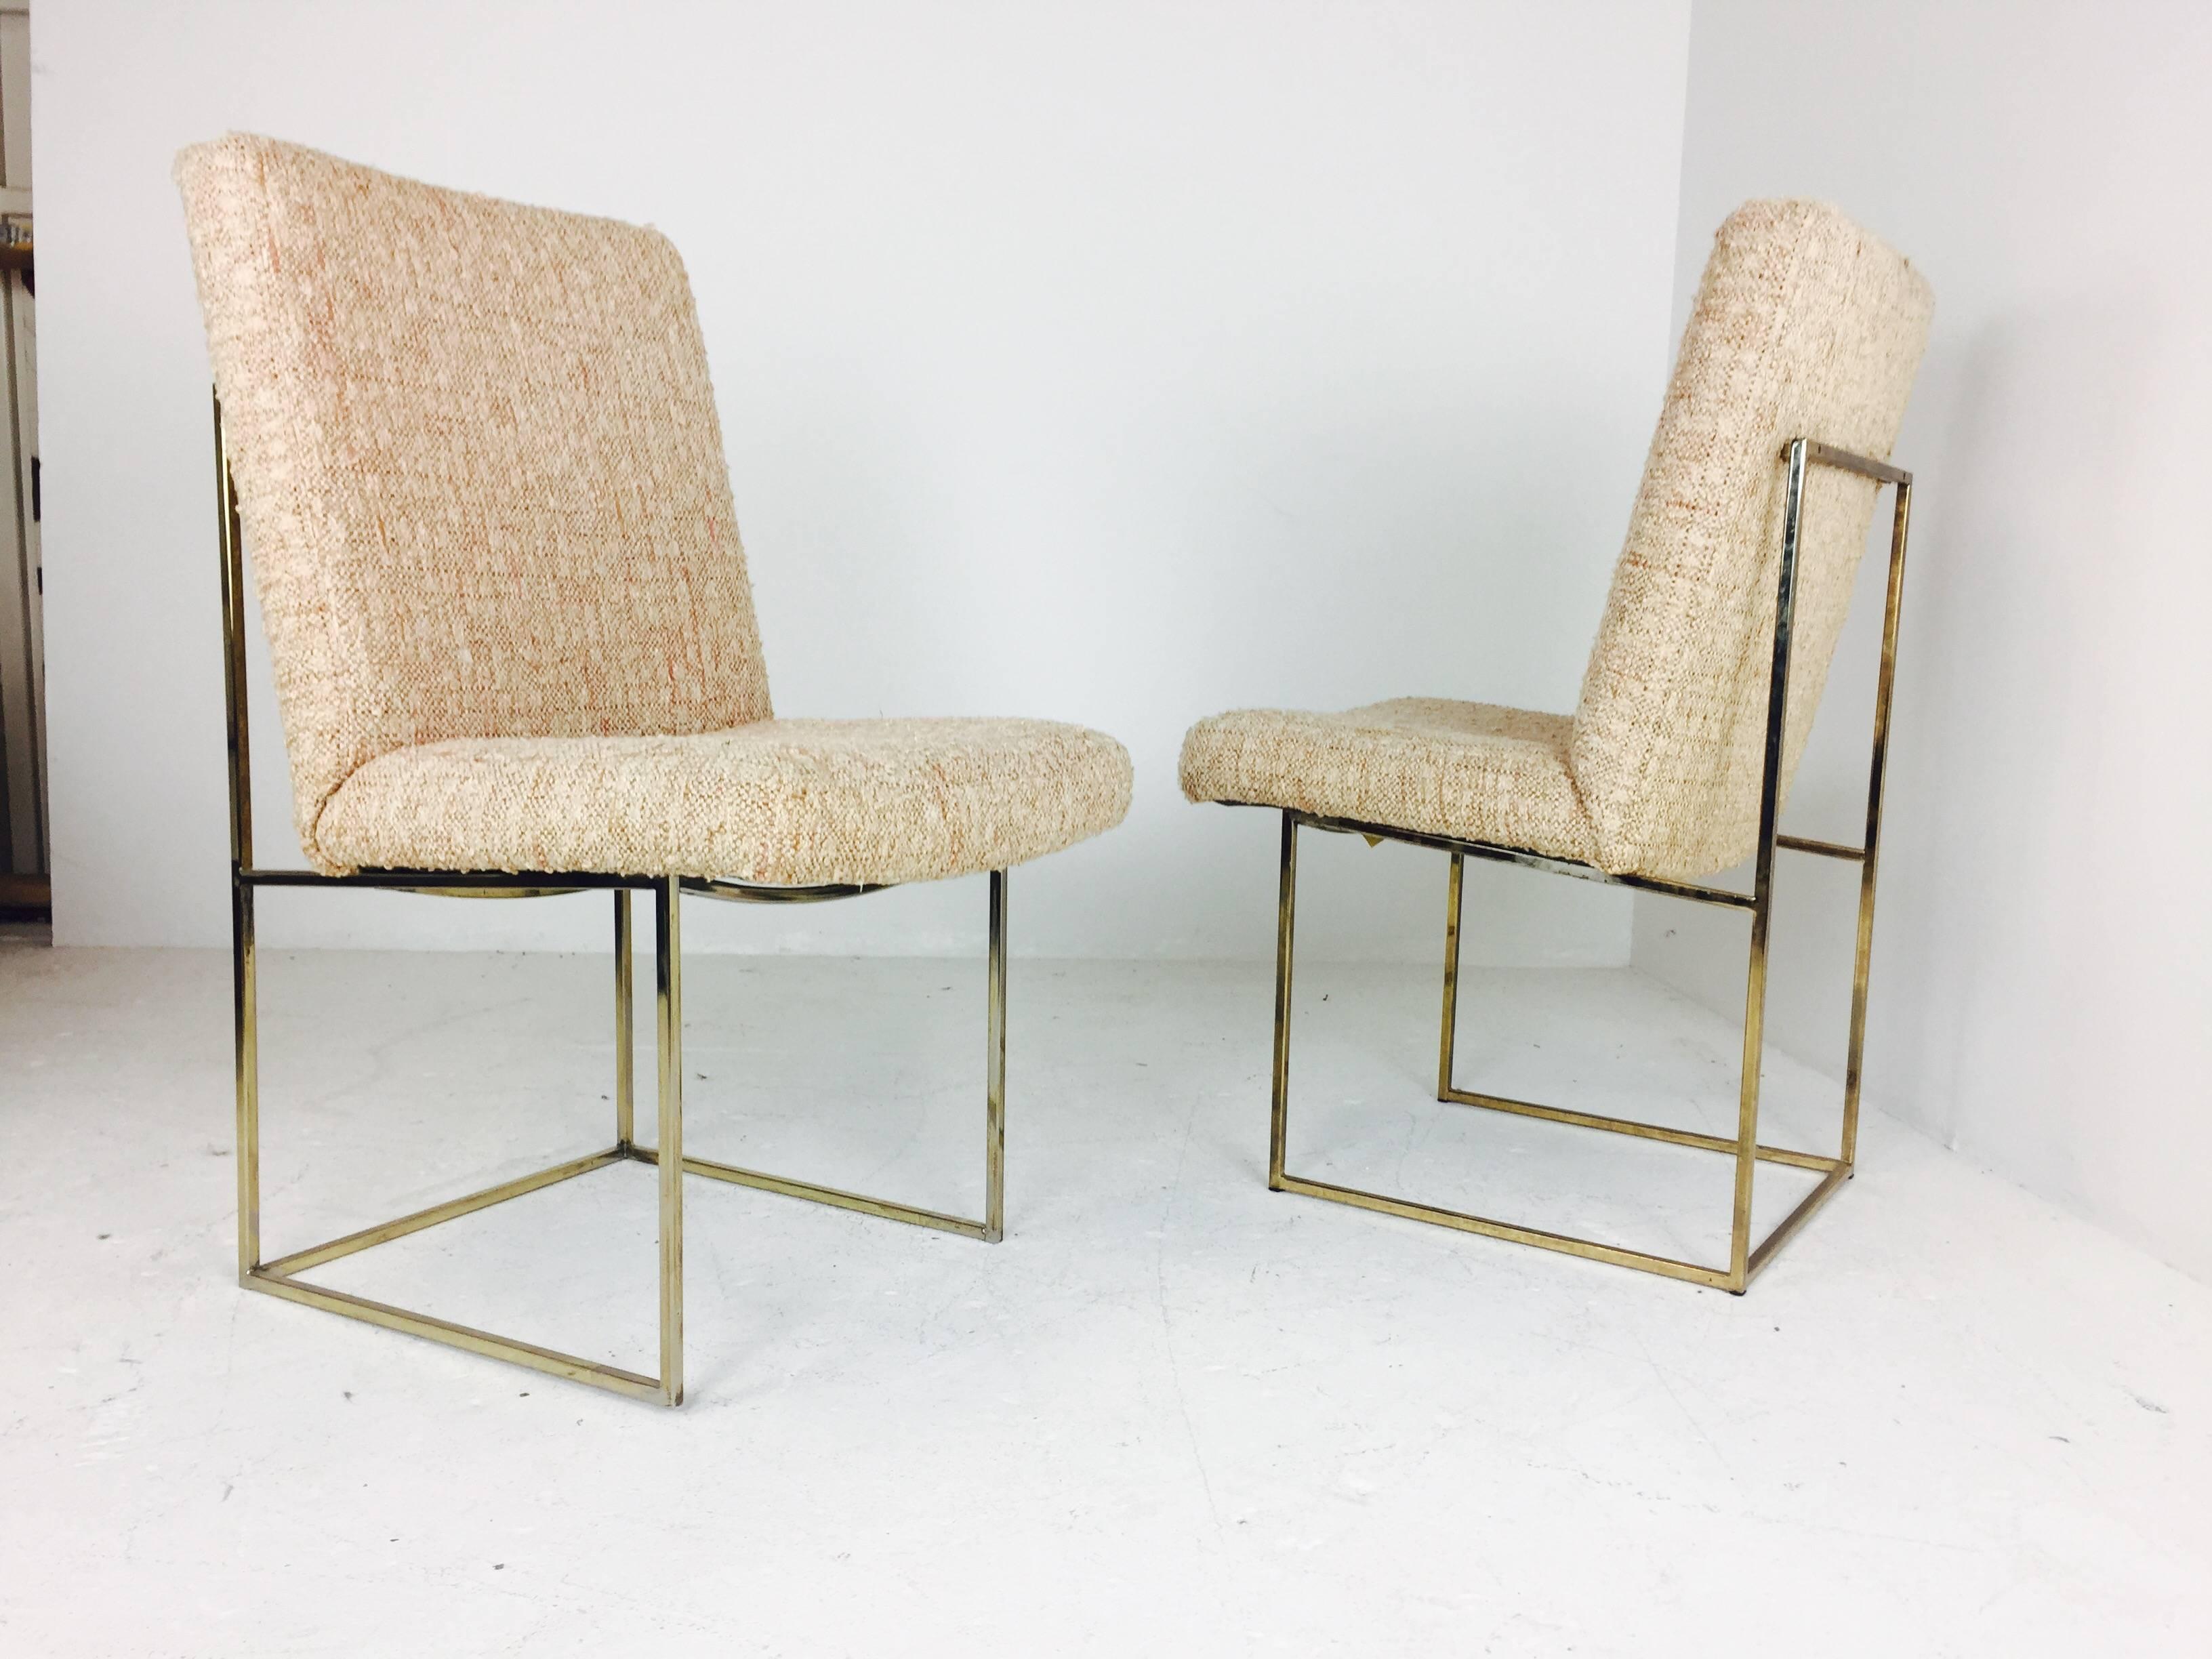 Plated Pair of Milo Baughman Brass Dining Chairs with Original Textured Fabric